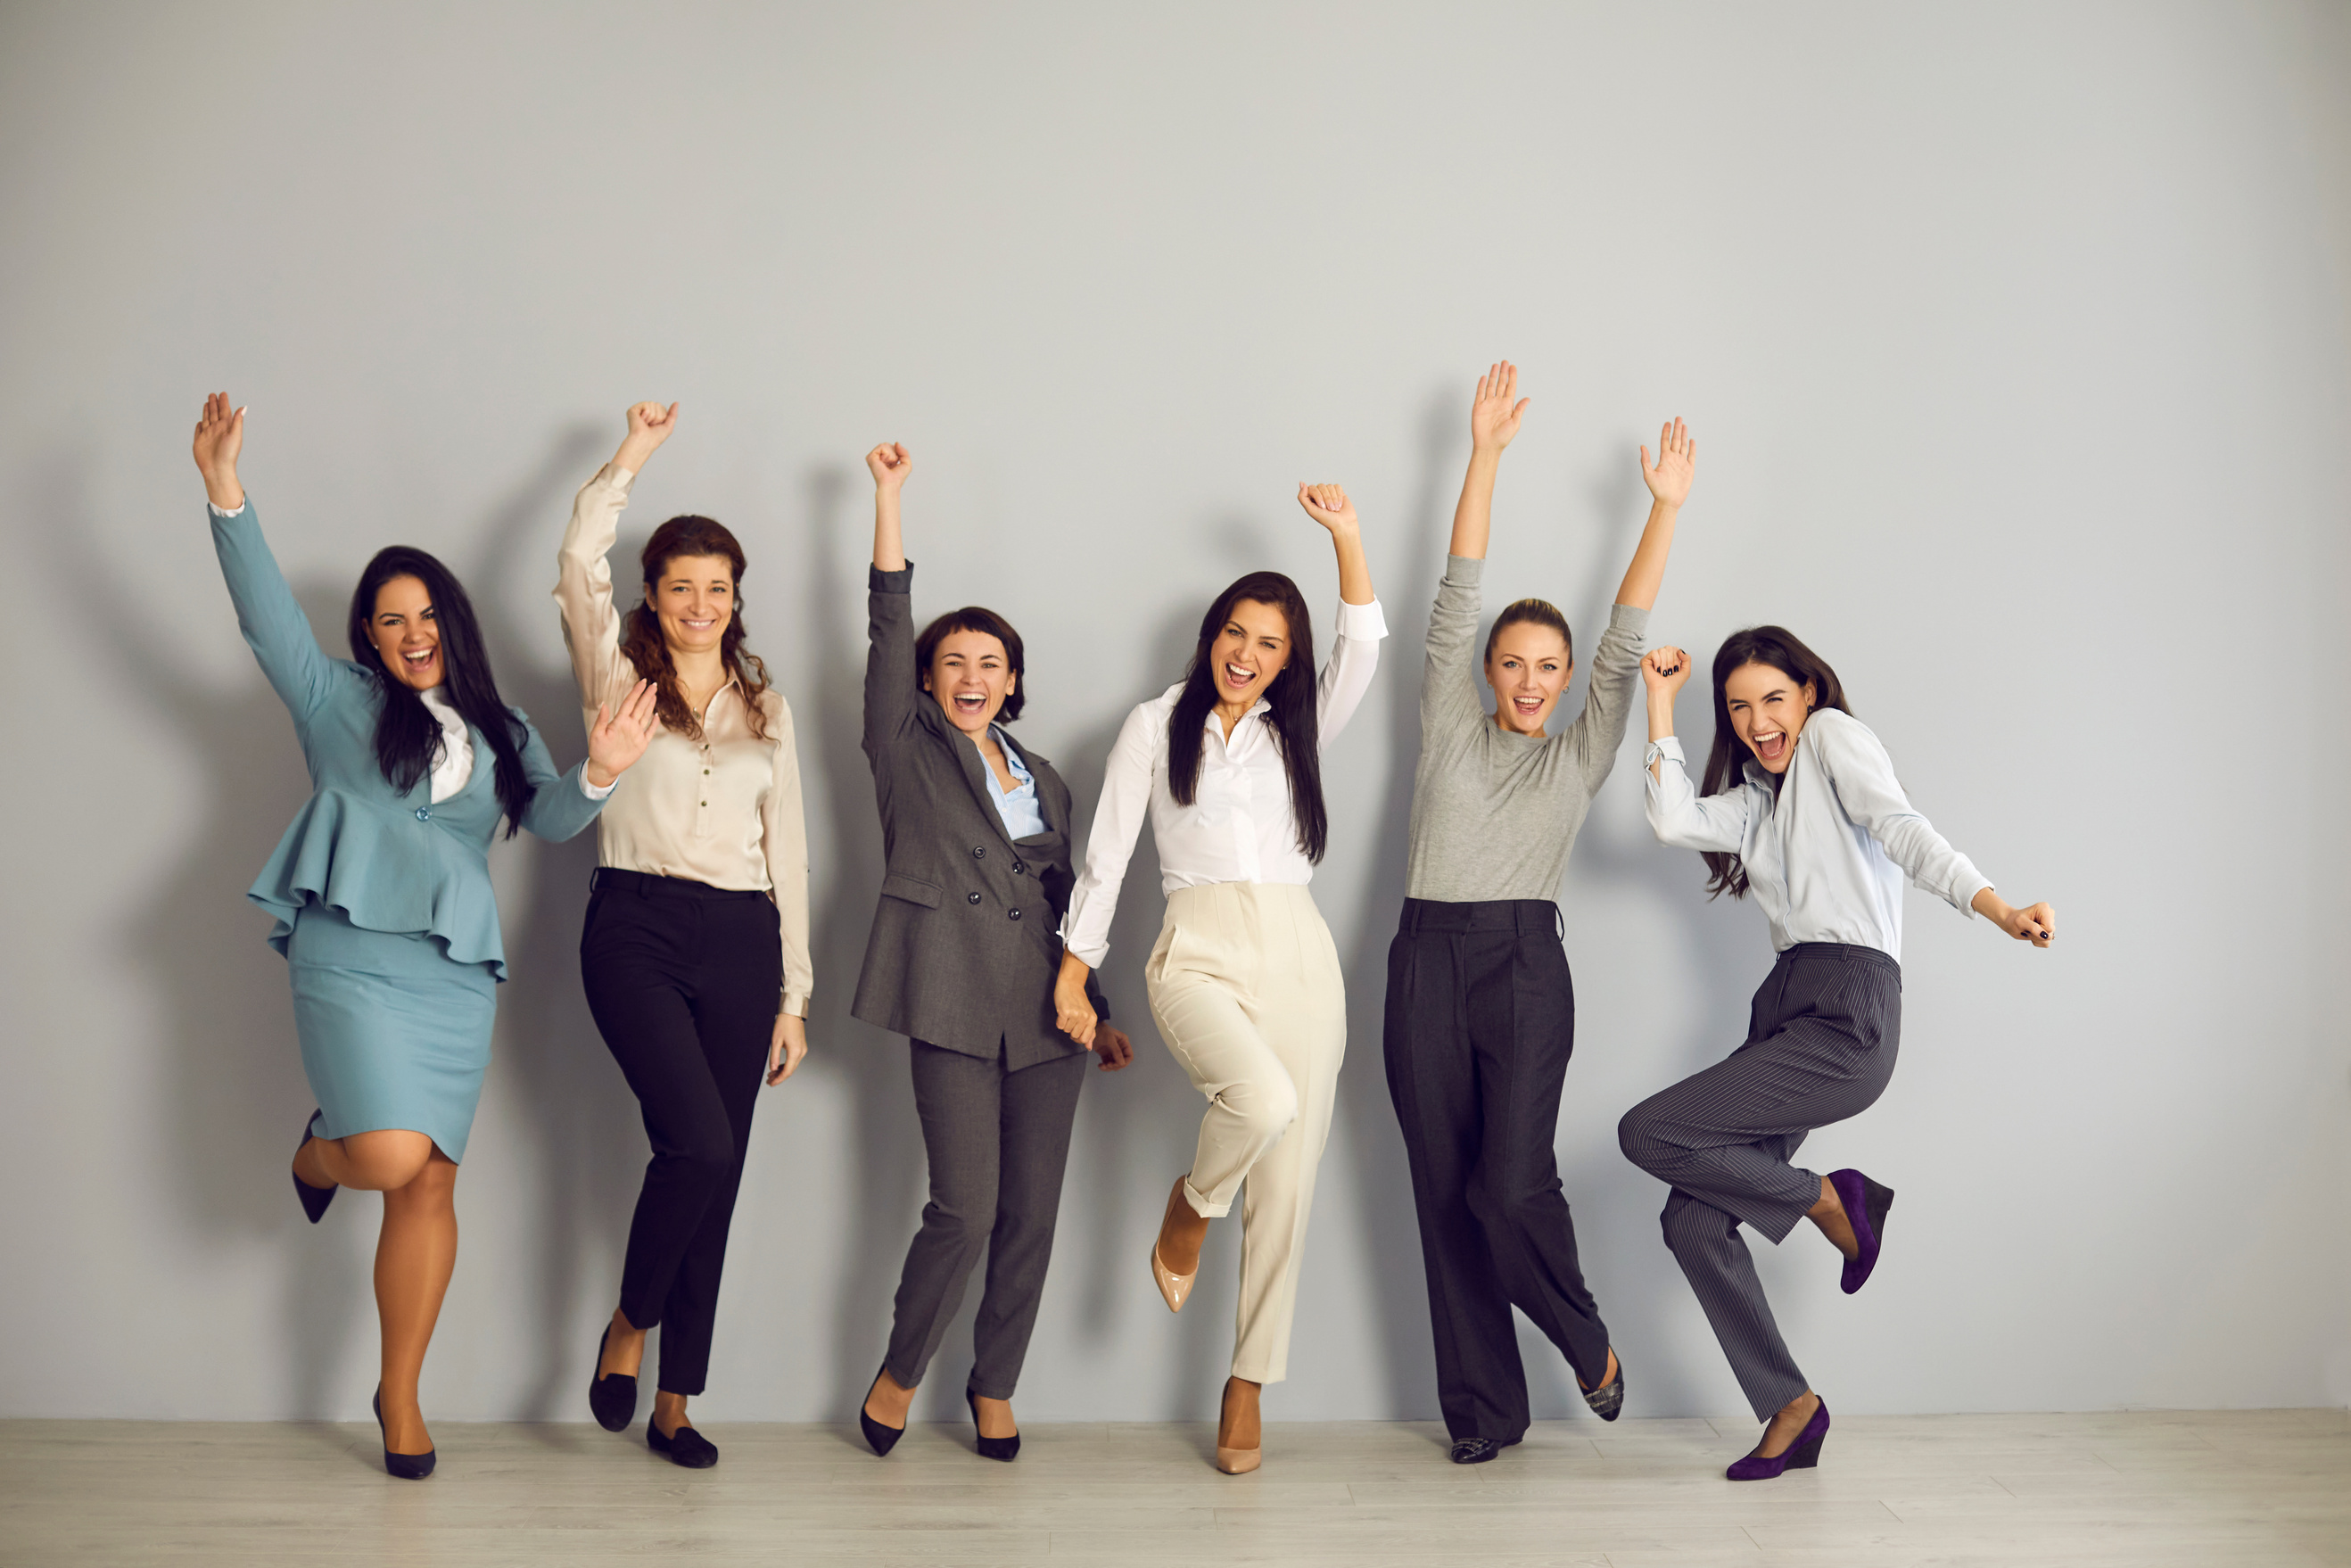 Smiling Positive Women Workers Jumping and Celebrating Business Win in Corporate Project